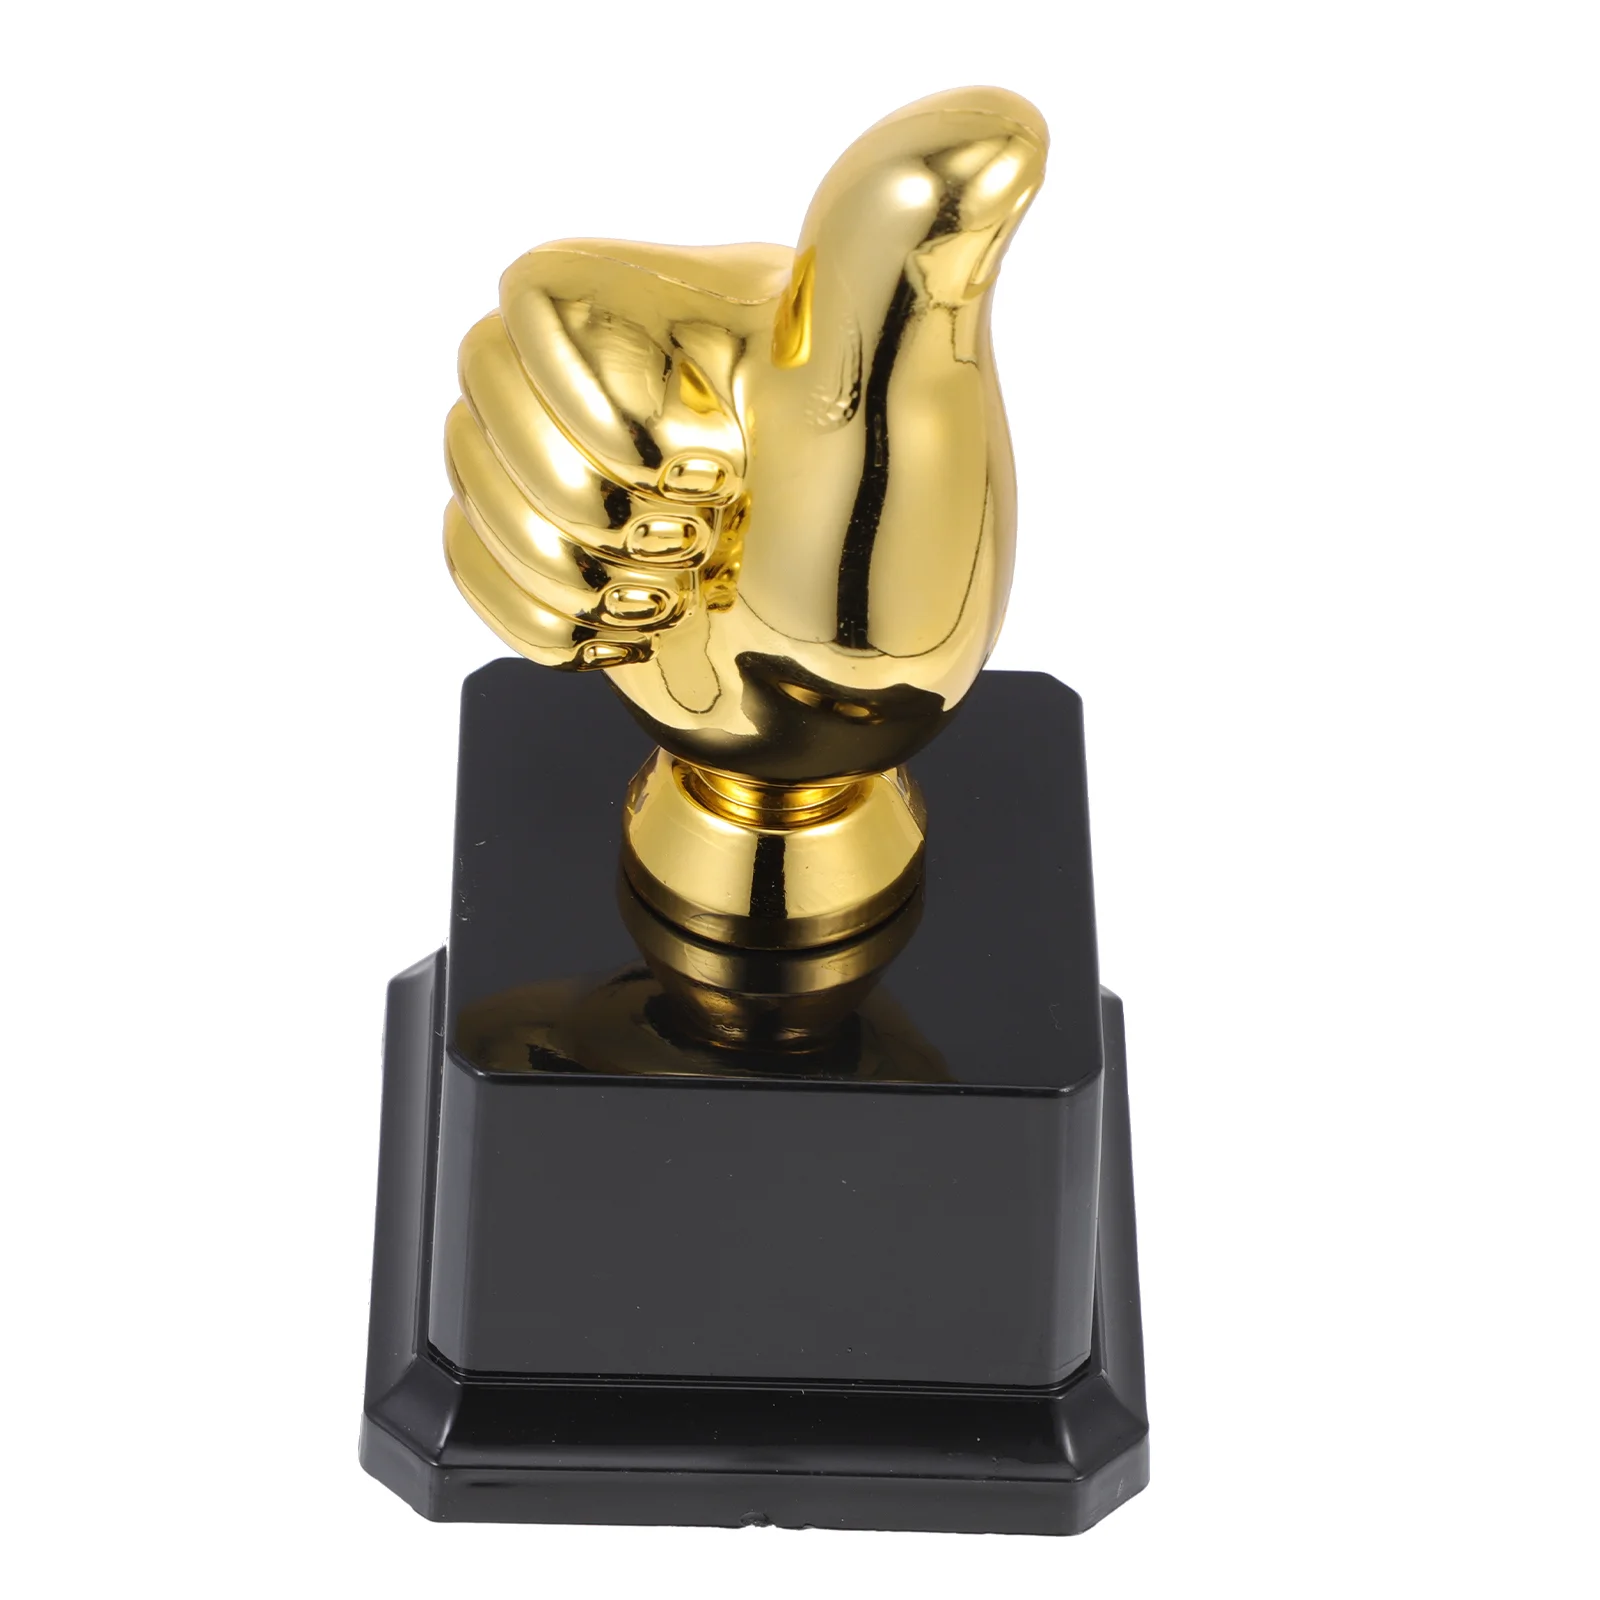 Trophy Awards Thumb Up Award Trophy Awards Plastic Golden Rewards Trophies Gold Awards Trophies Party Favors Sports Competition trophy trophies mini kids award plastic awards gold soccer prize party small ceremony star winner favors prizes